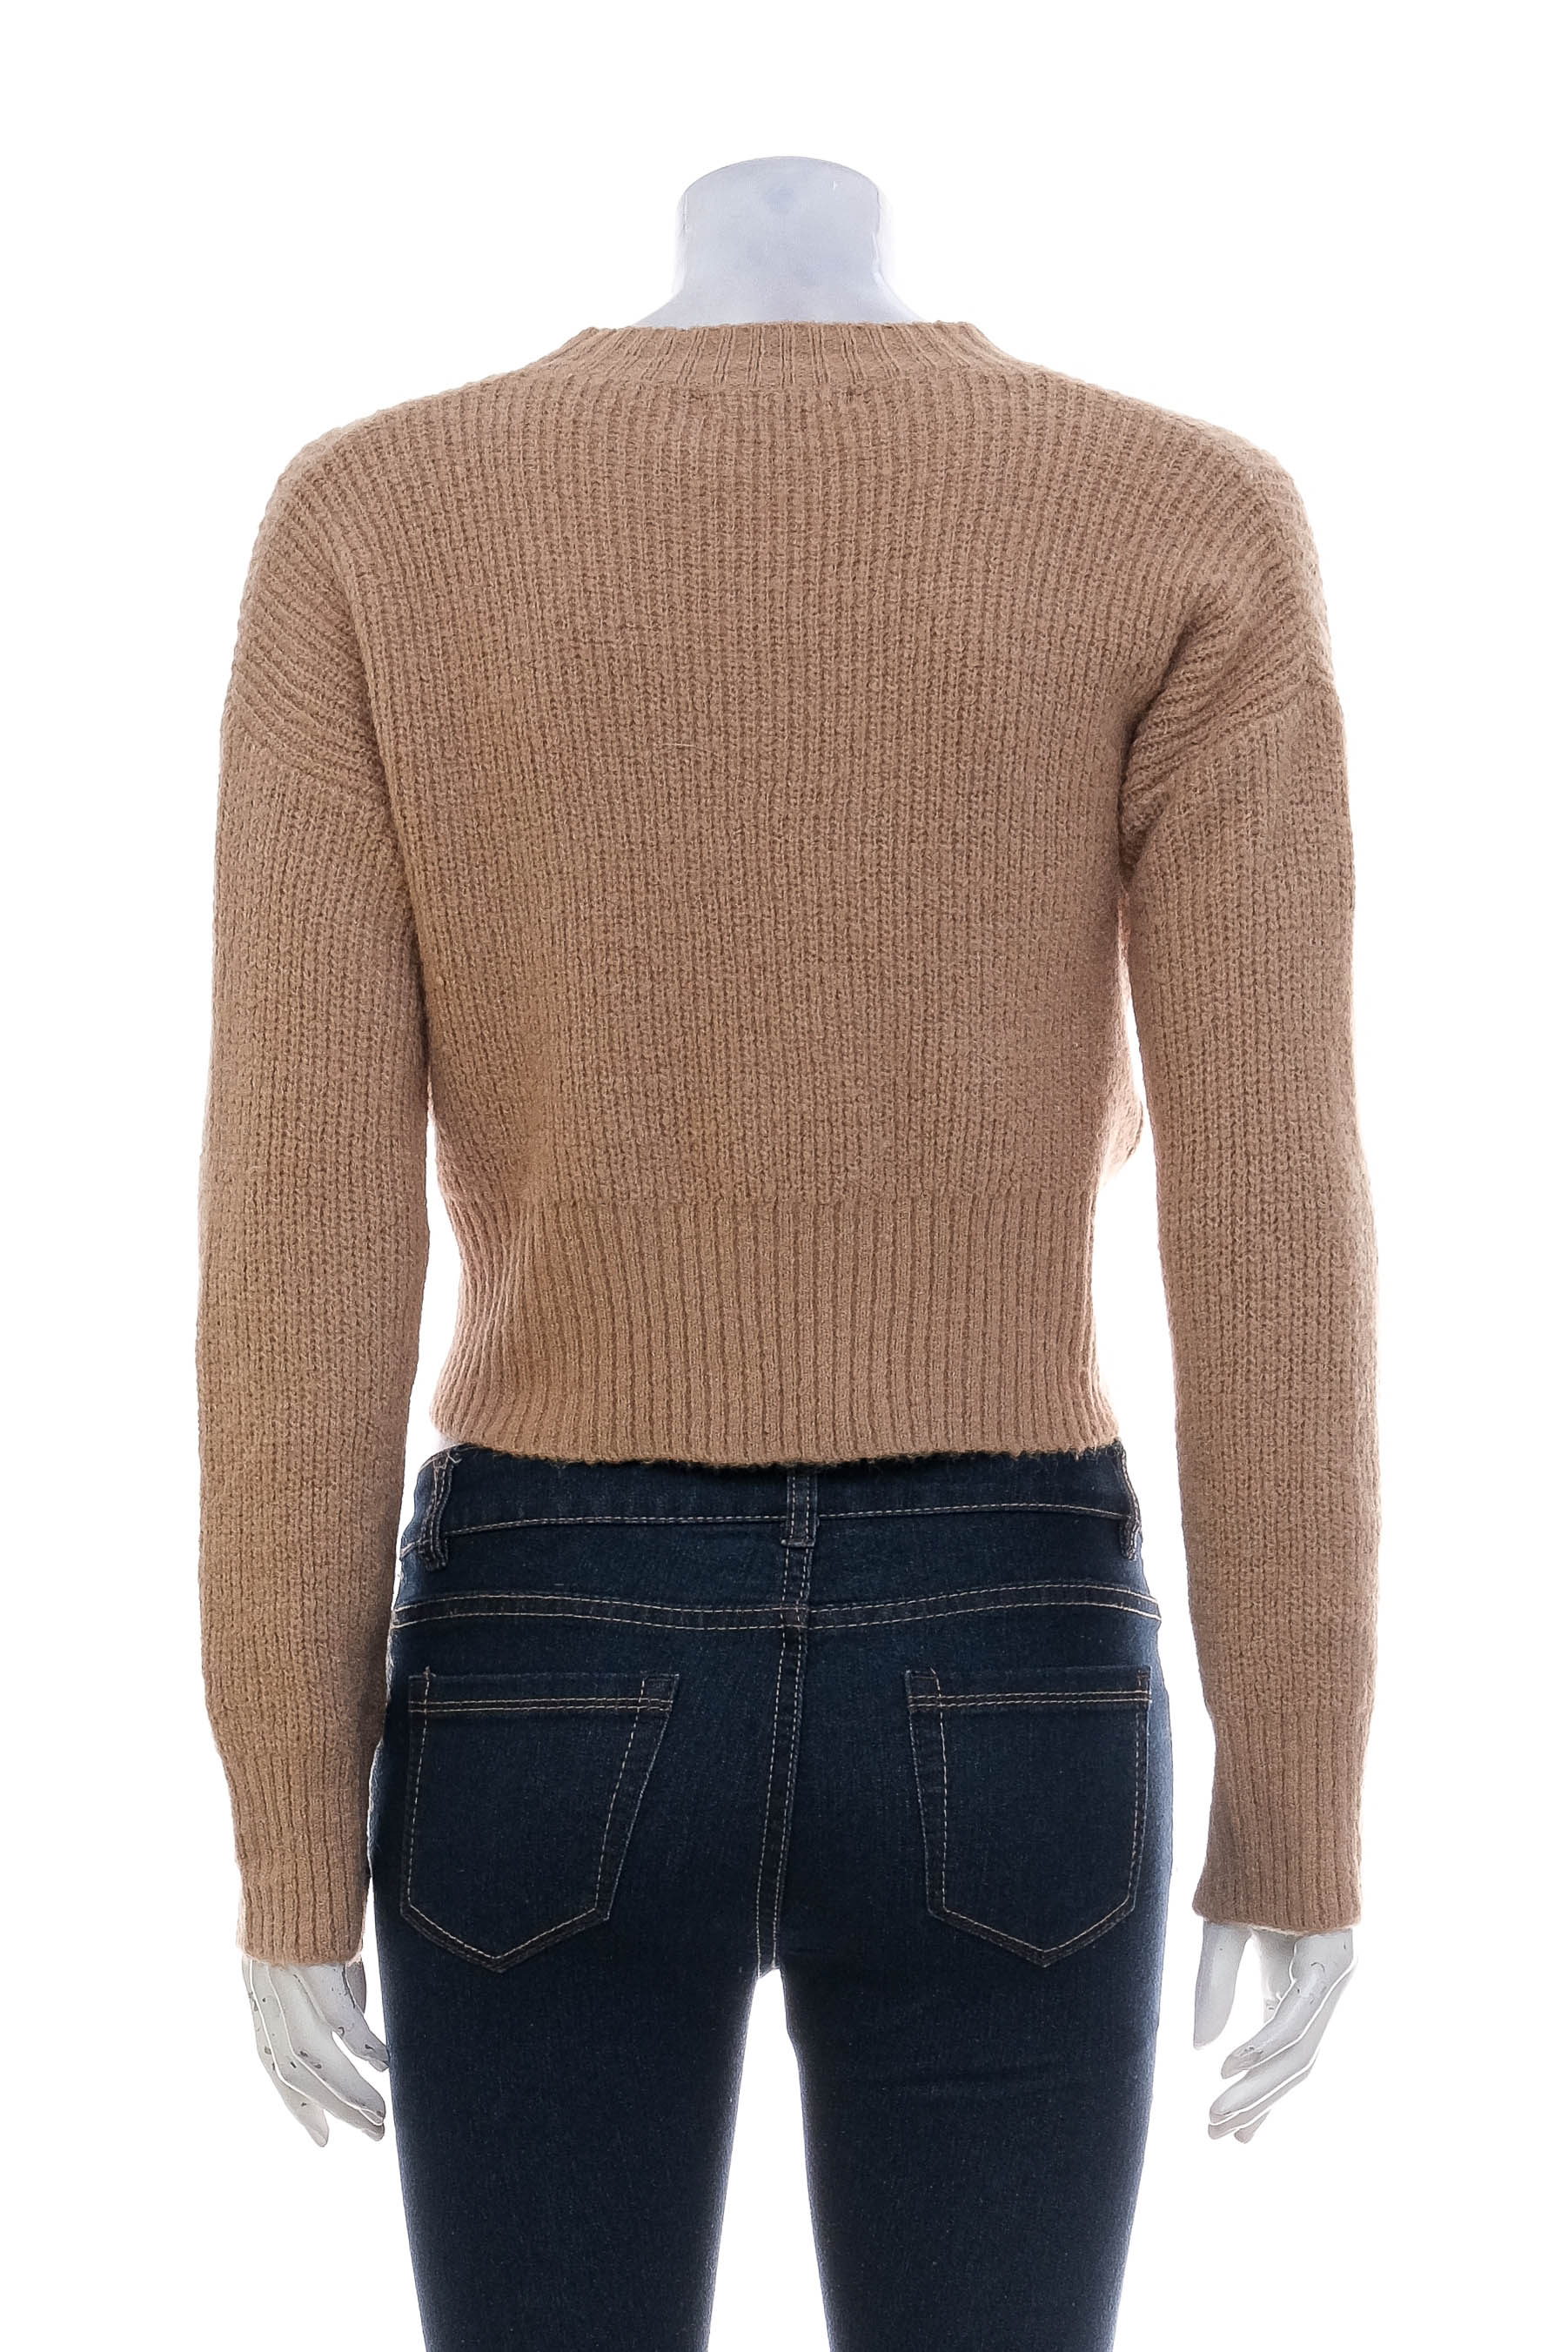 Women's sweater - Style STATE - 1